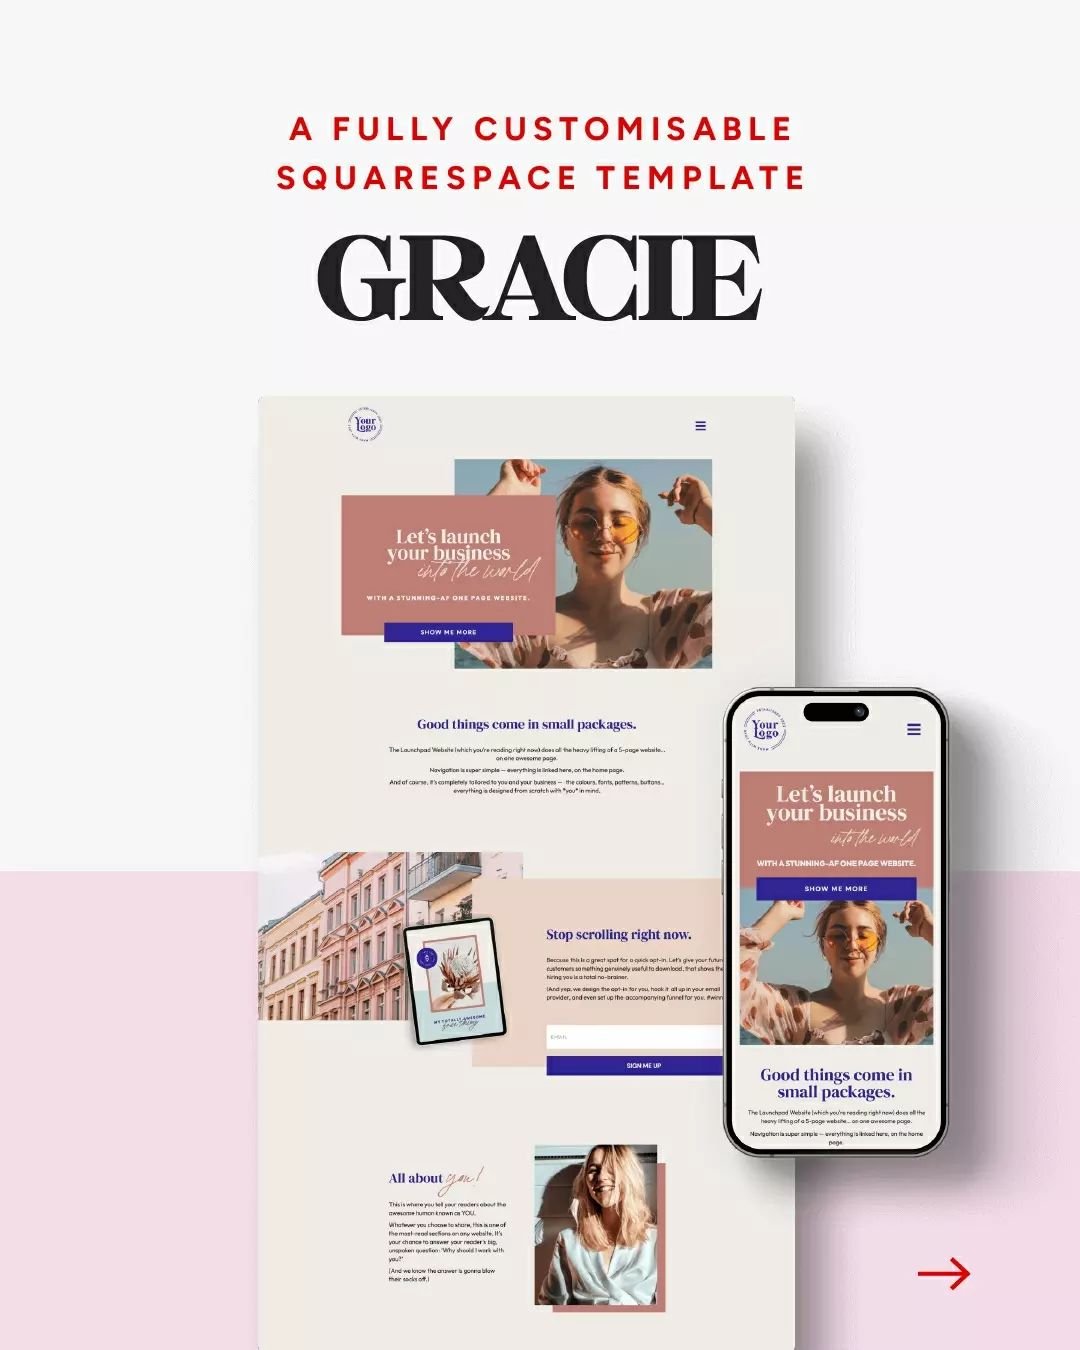 Want to freshen up your website&rsquo;s visuals 

without dropping a ton of cash on a new website design? 💰

*Ahem* Let us introduce you to Gracie, a 100% customisable Squarespare template that ticks all your dreamiest boxes

✅Visually stunning
✅Sim